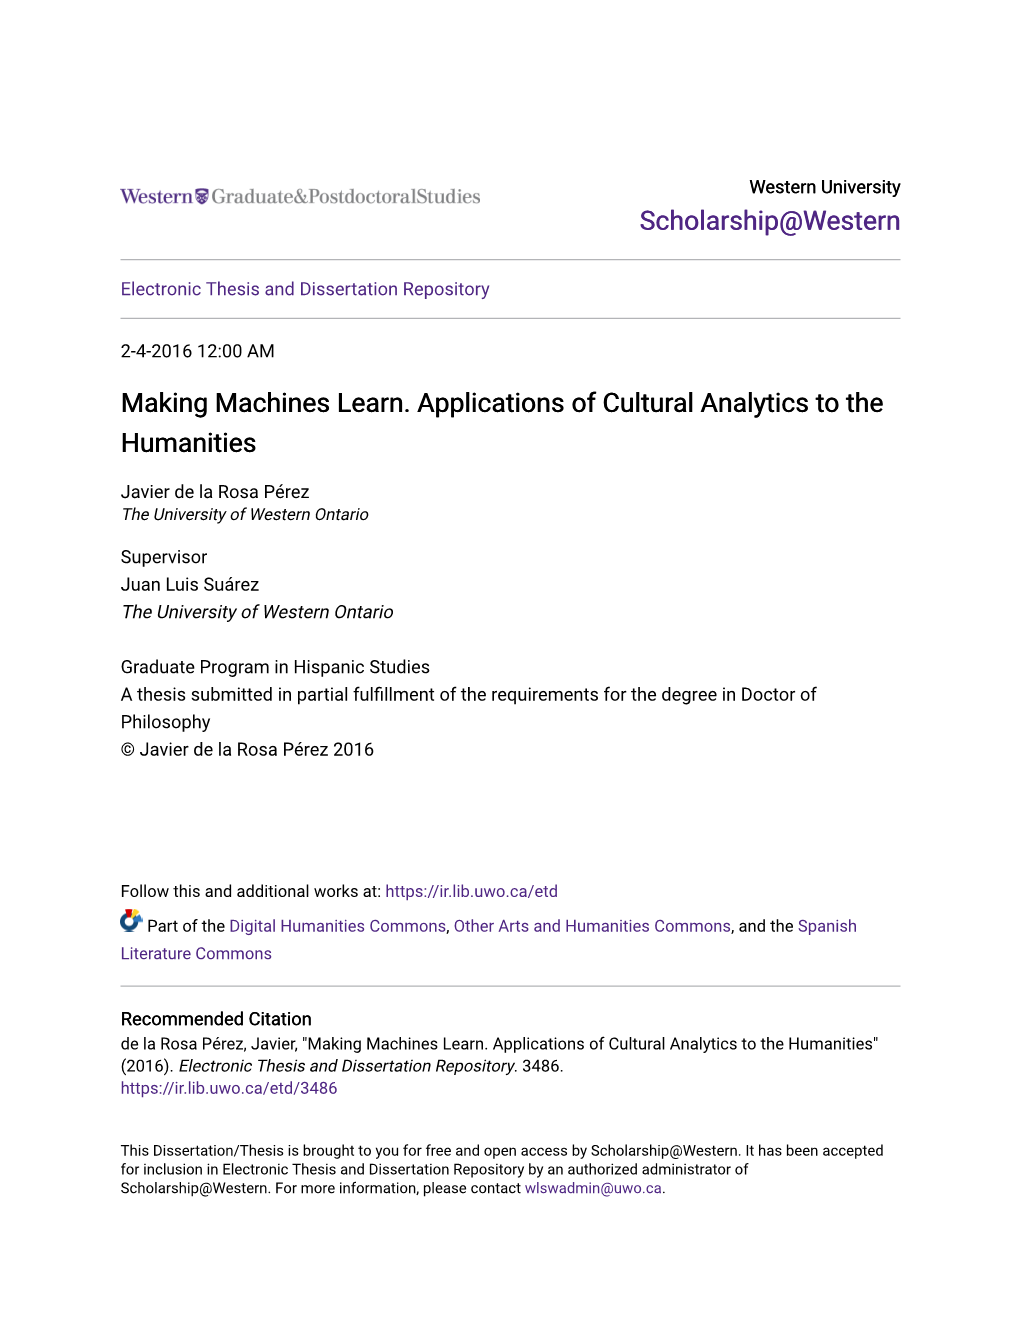 Making Machines Learn. Applications of Cultural Analytics to the Humanities